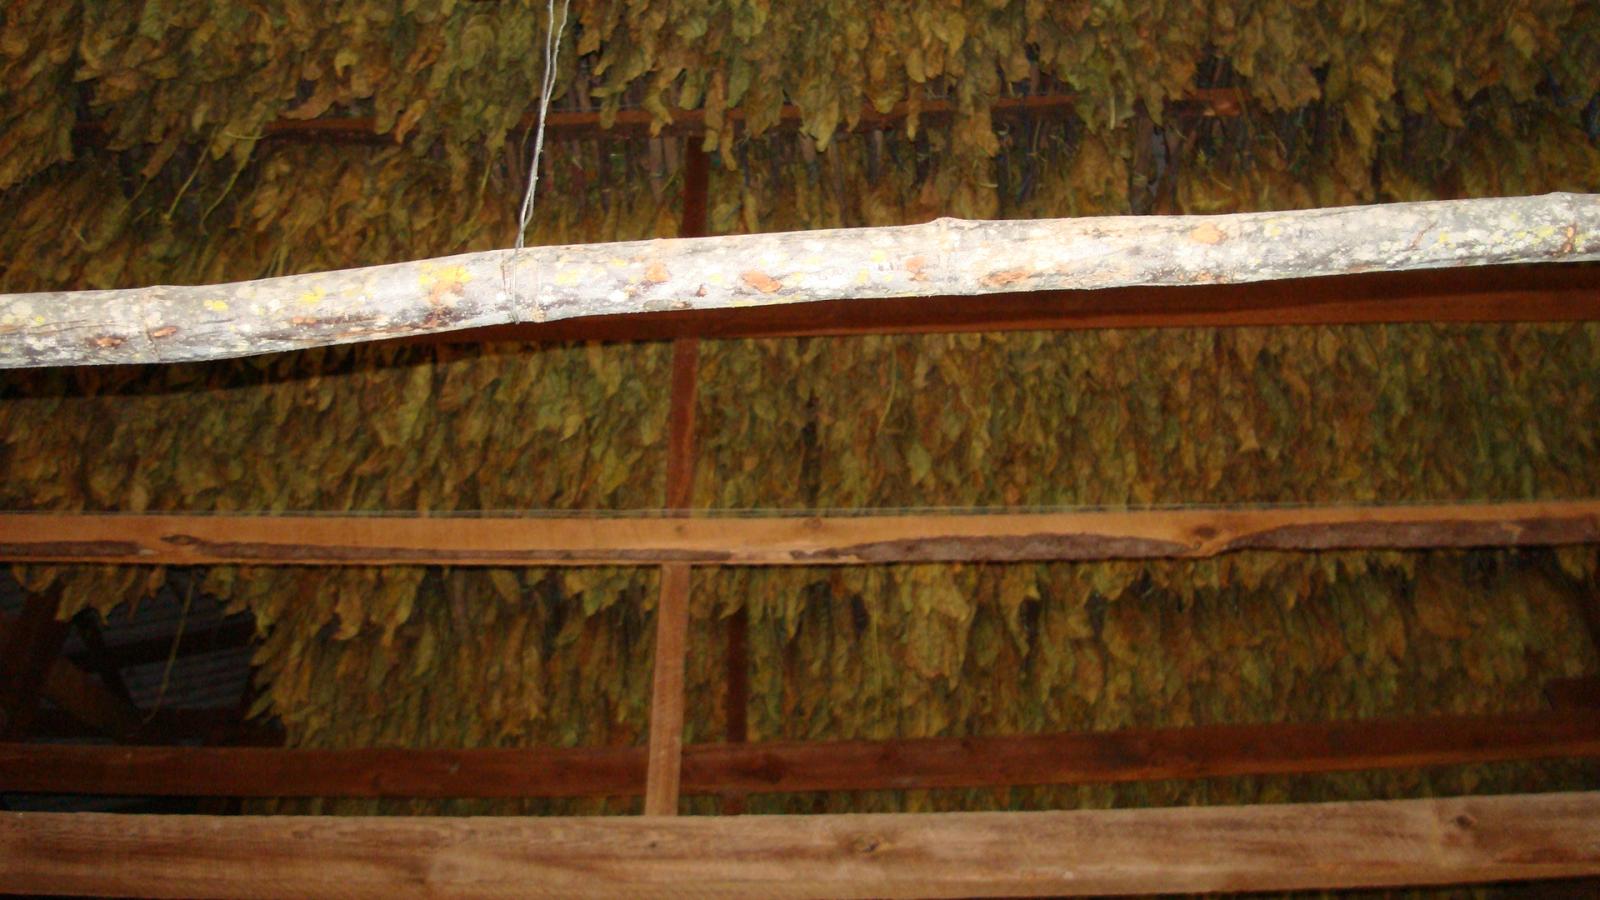 Tobacco that's almost done drying